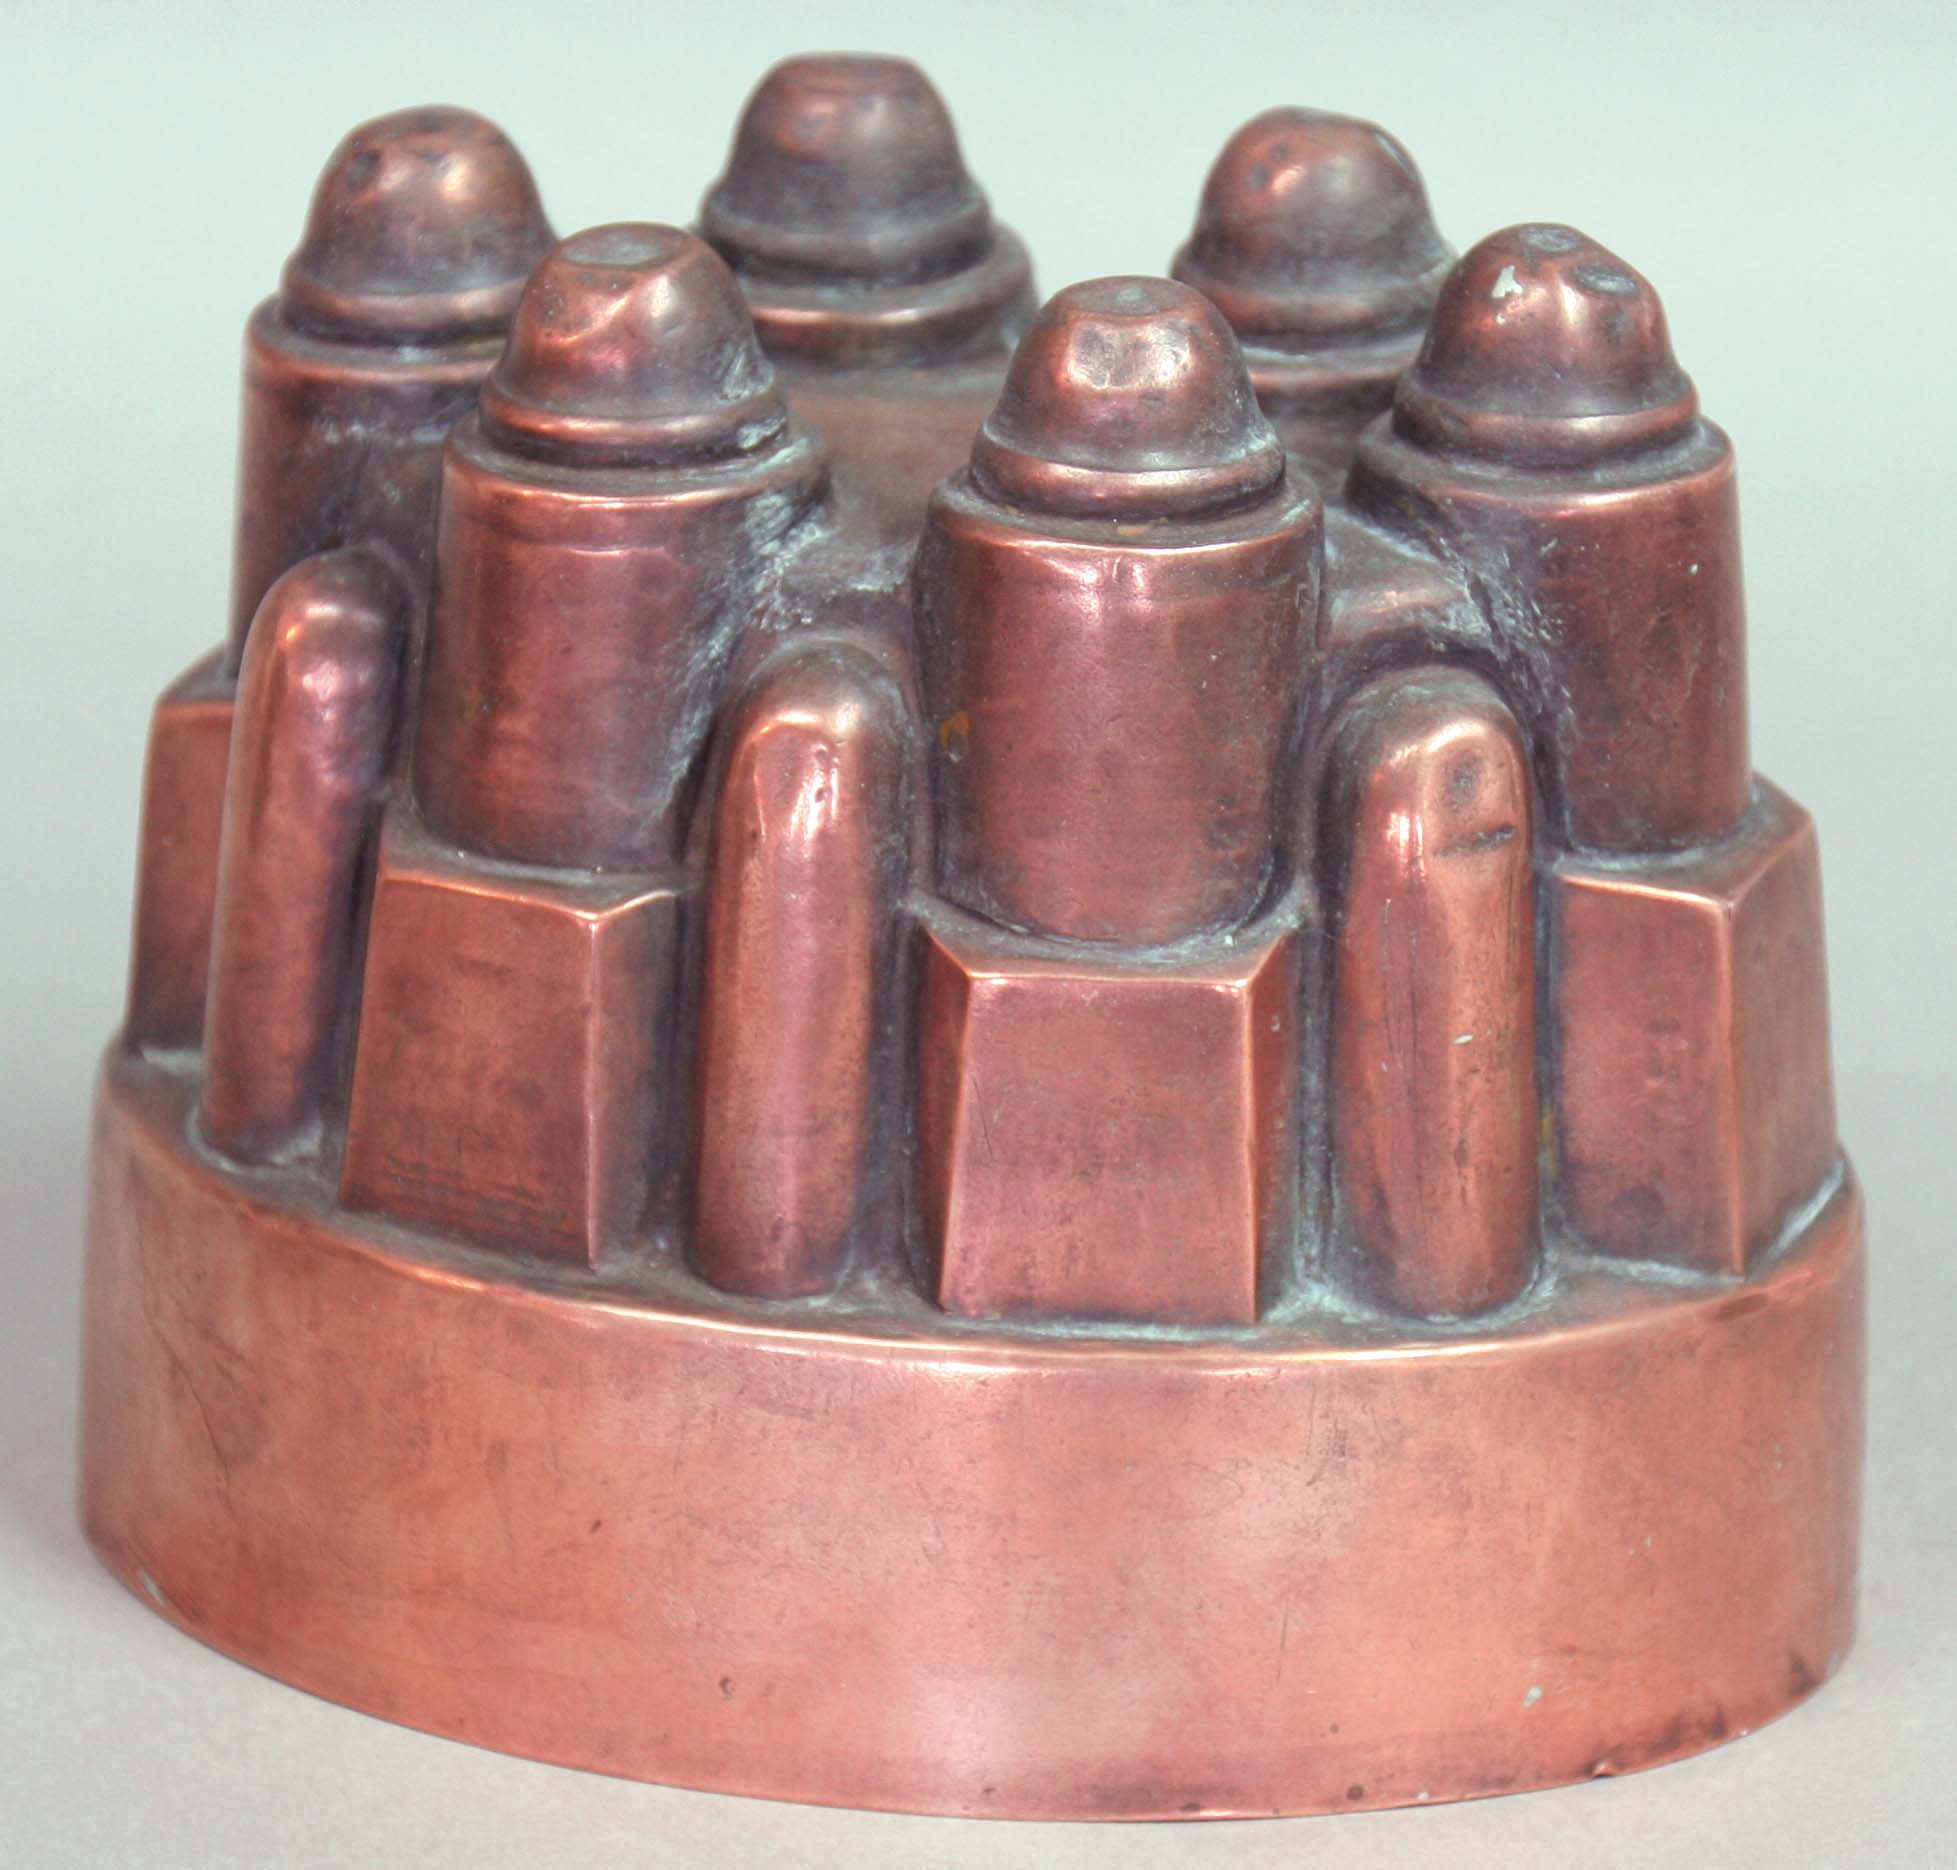 COPPER JELLY MOULD, late 19th century, stamped 643 beneath a cross and orb, length 13.5cm